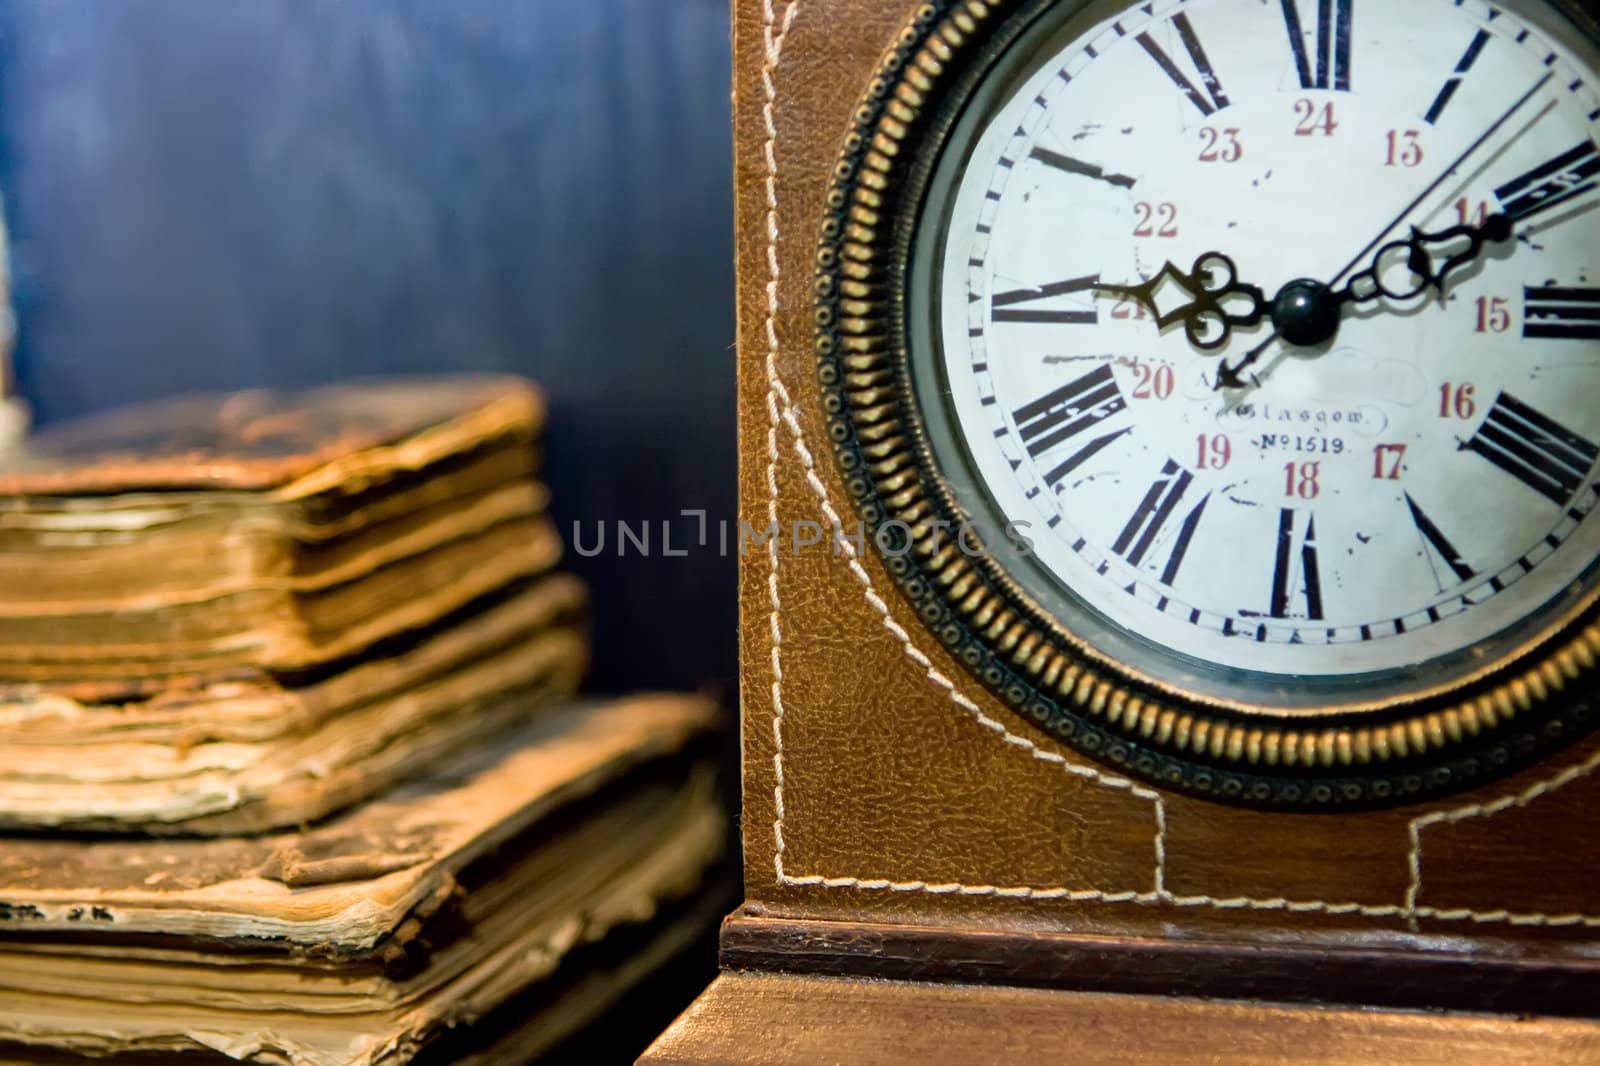 Old books and old clock with leather cover